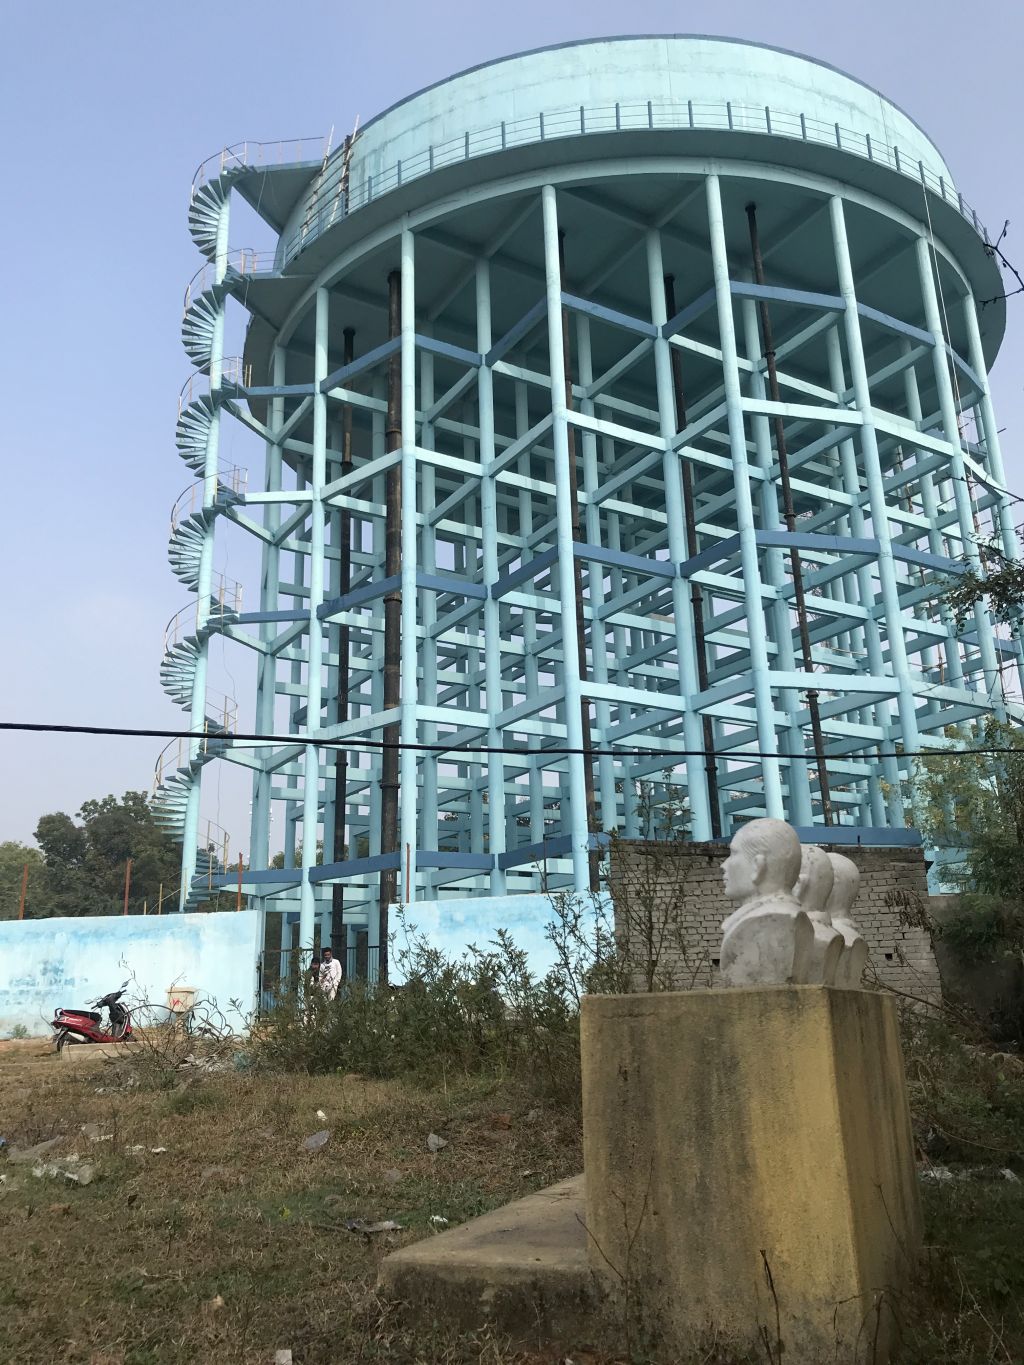 Construction for the water scheme is taking place on lands of deep cultural significance (Image: Anirudha Nagar, Accountability Counsel)